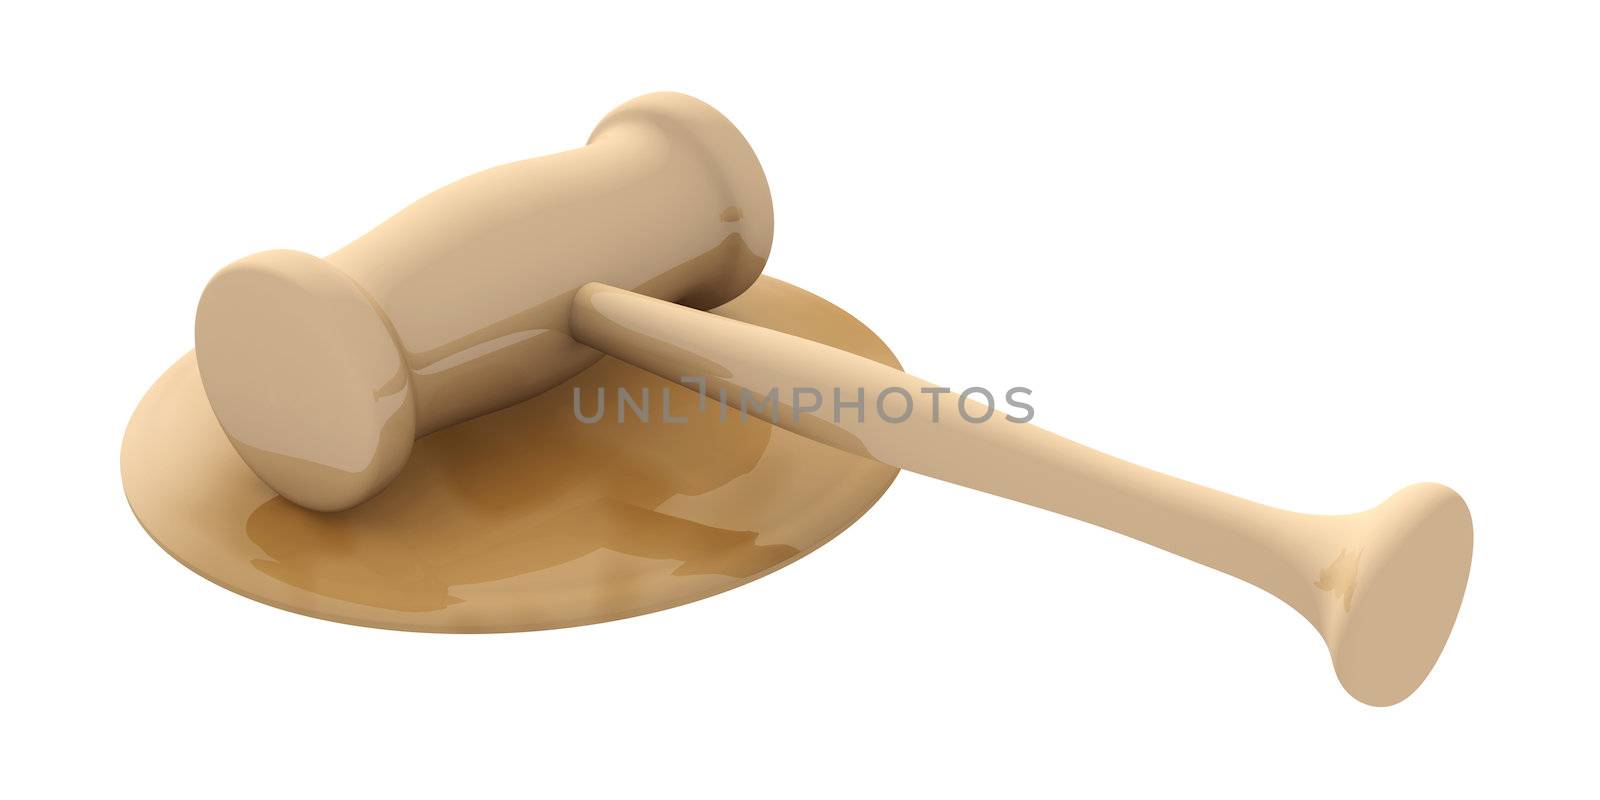 3D rendered Illustration. Isolated on white. An Auction or Court Hammer.
